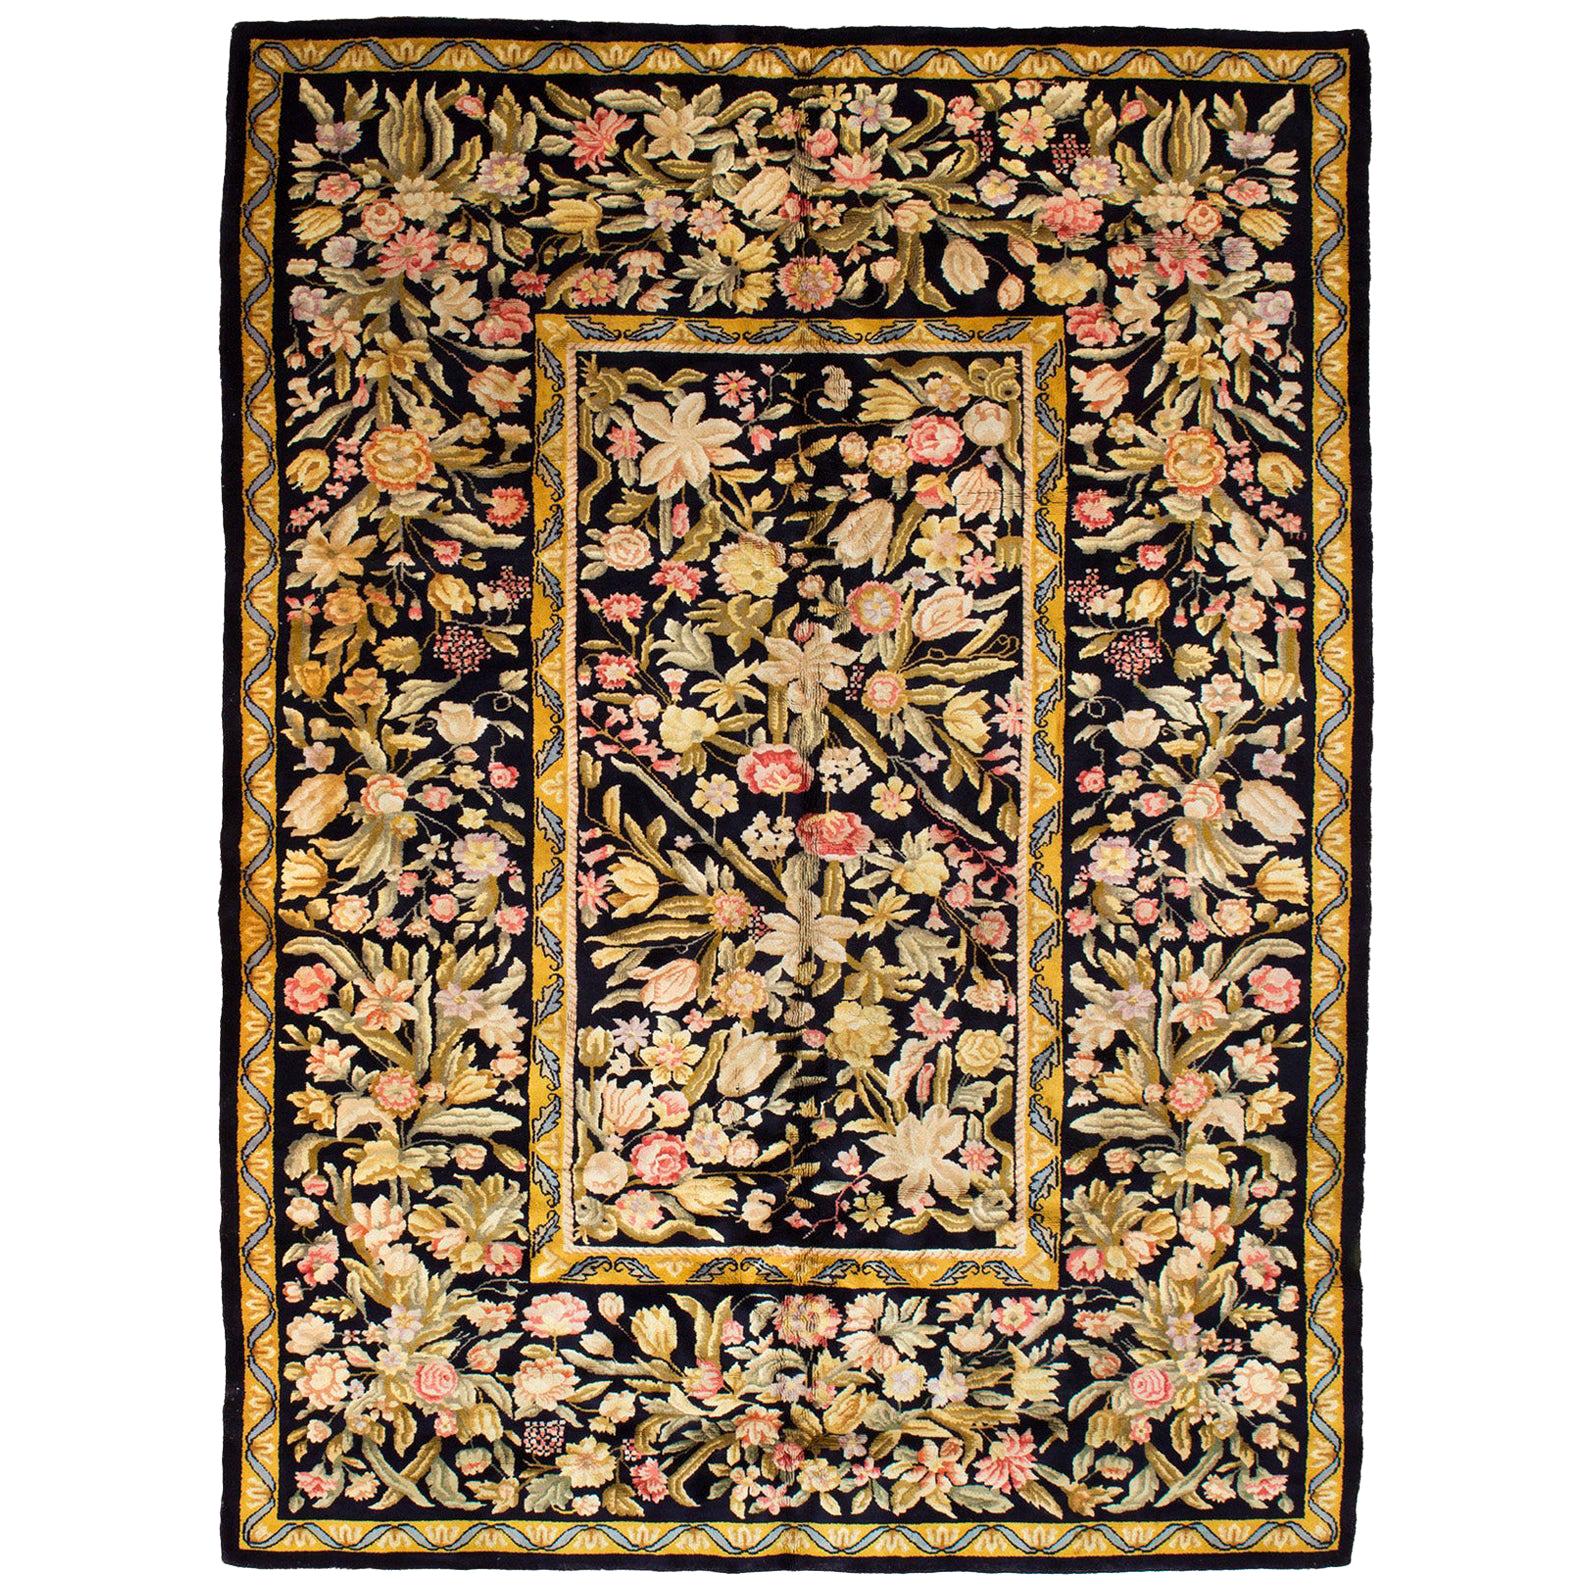 Antique Midnight Blue Austrian Savonnerie Rug with White Flowers, circa 1940s For Sale